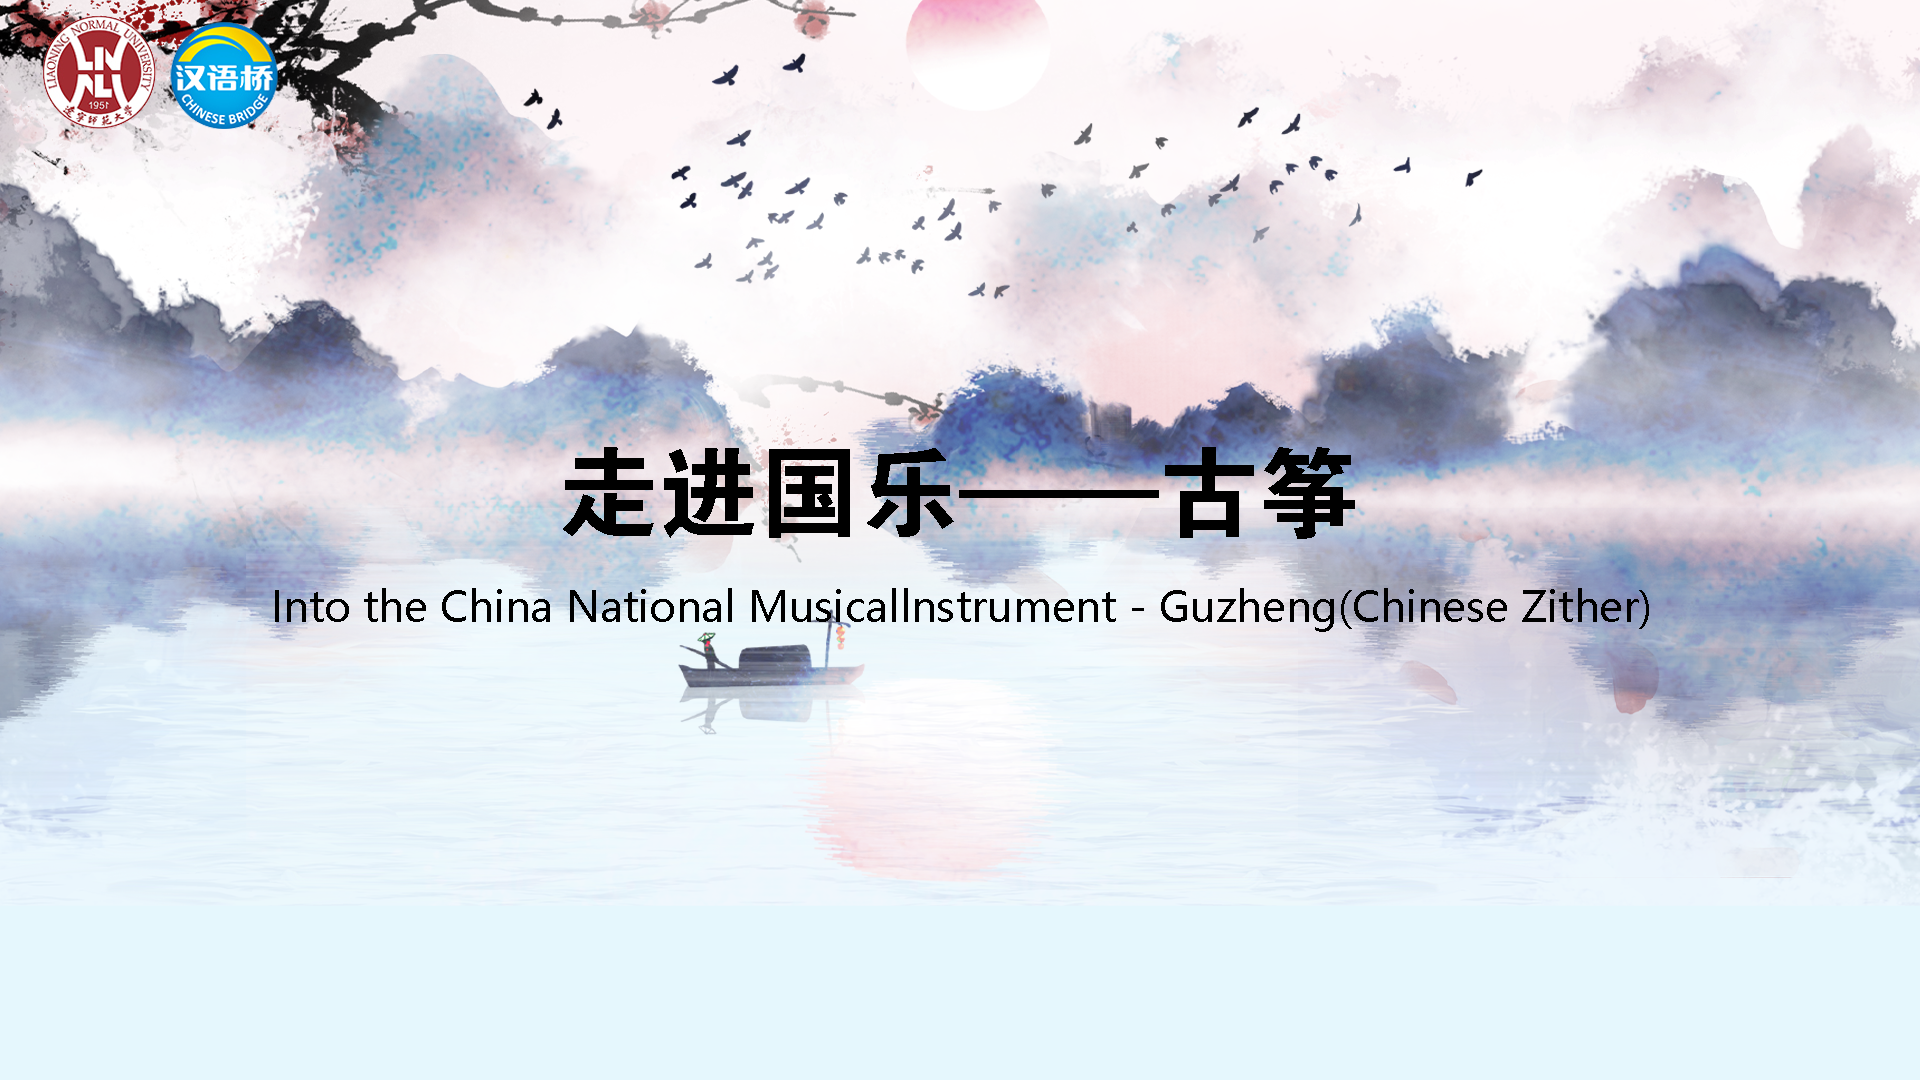 Into the China National Musical Instrument - Guzheng(Chinese Zither)